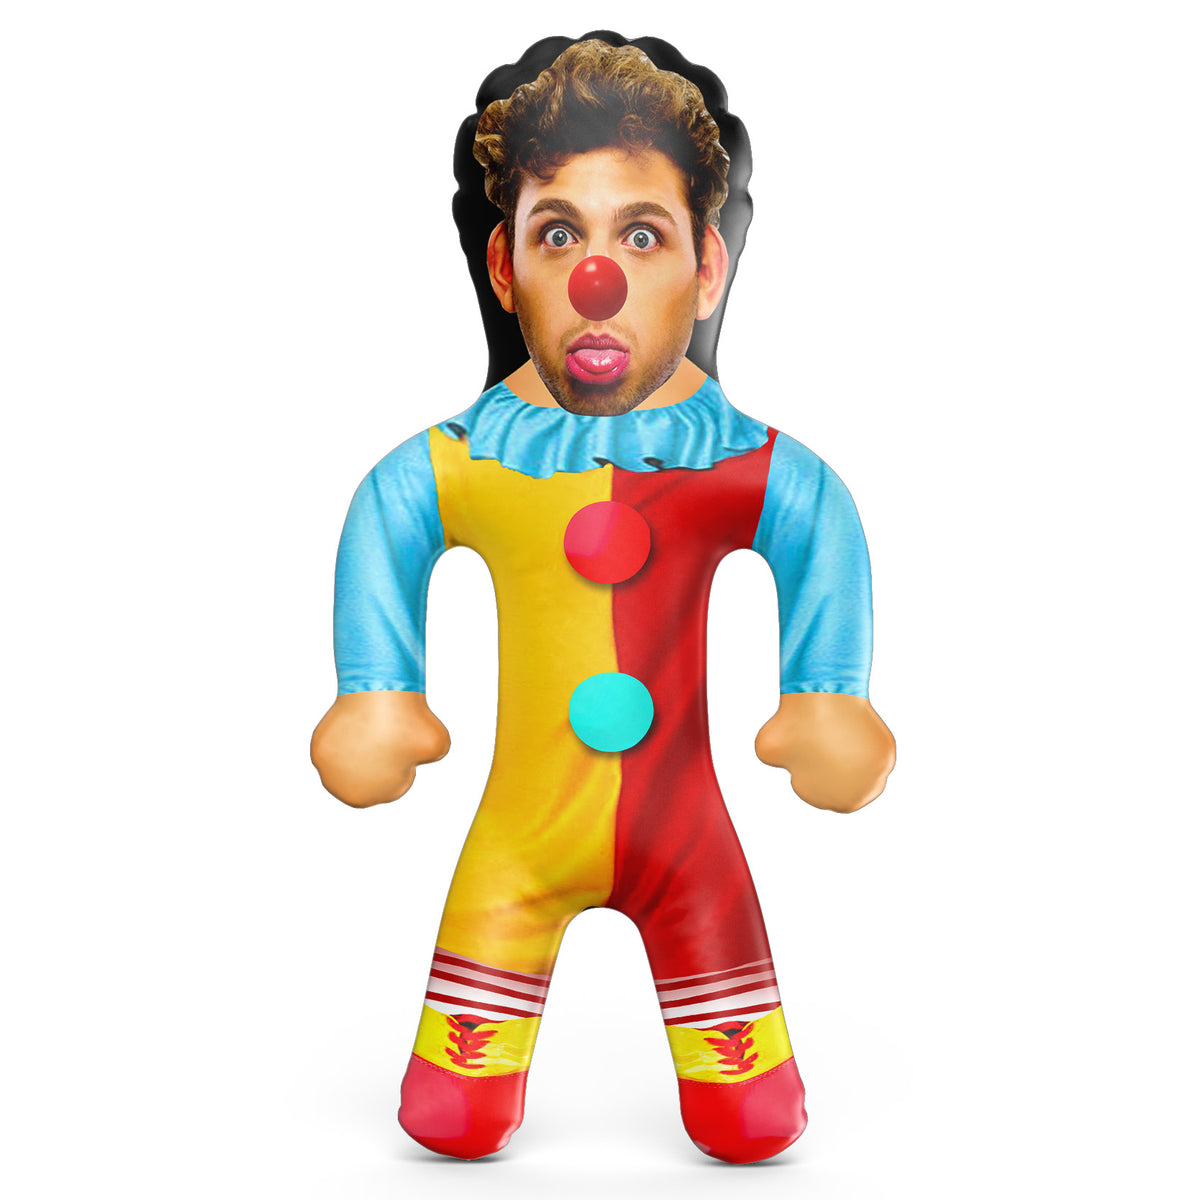 Clown Inflatable Doll - Blow Up Doll